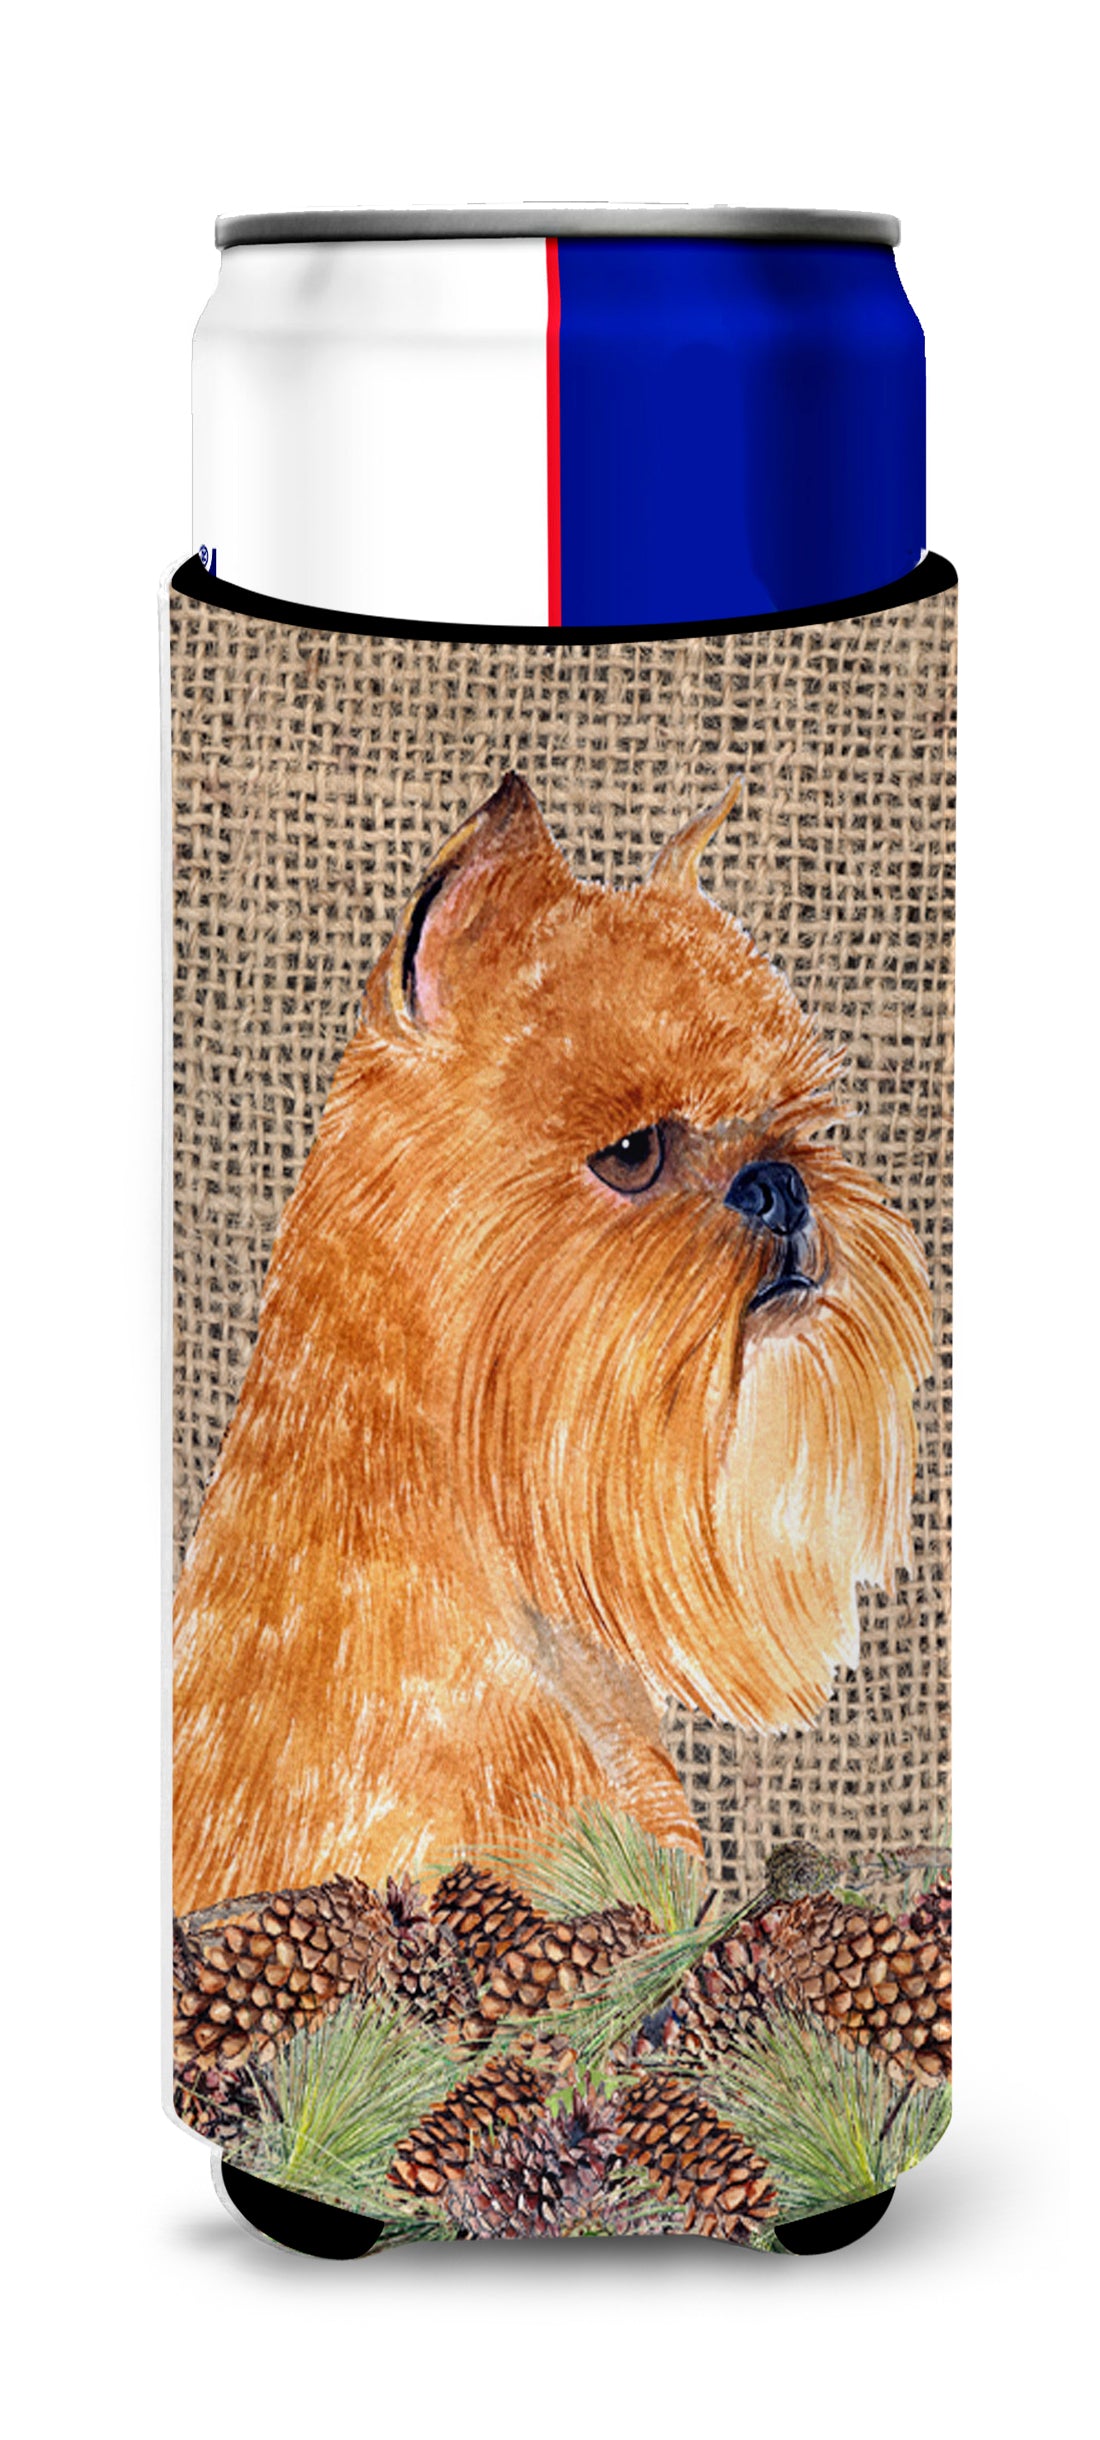 Brussels Griffon on Faux Burlap with Pine Cones Ultra Beverage Insulators for slim cans SS4084MUK.